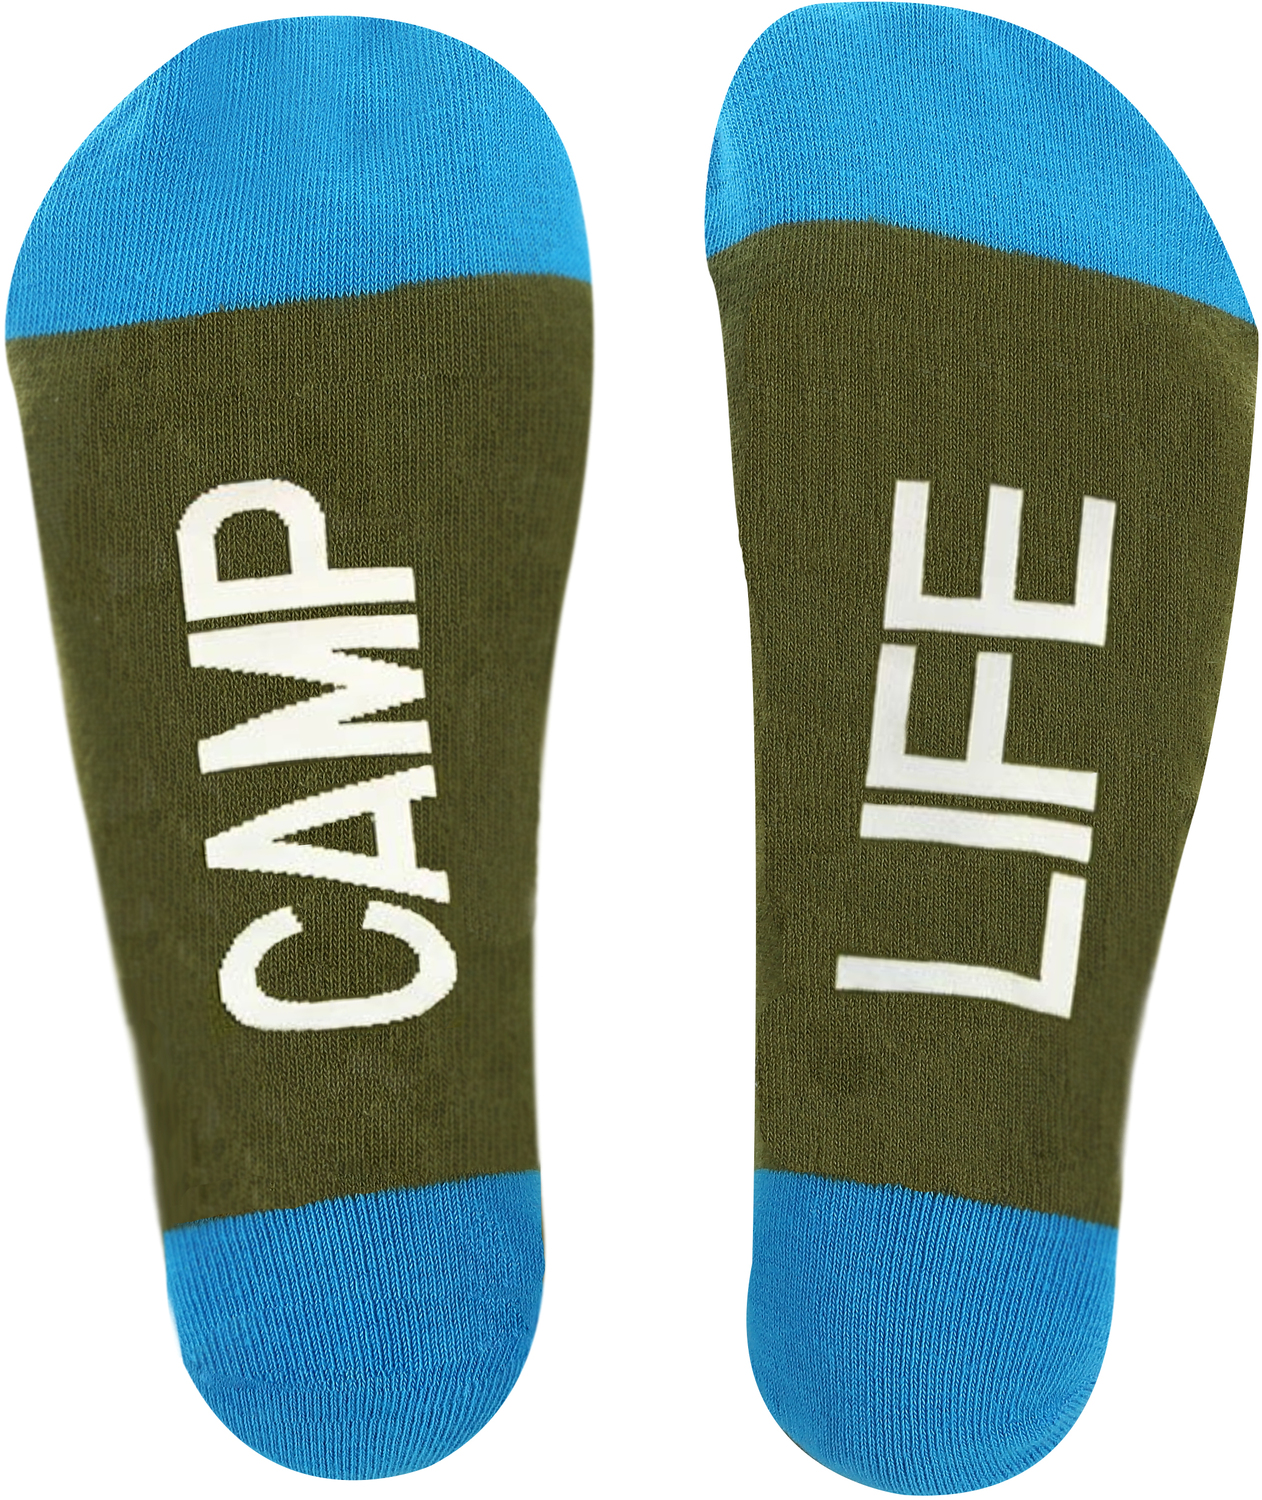 Camp Life by We People - Camp Life - S/M Unisex Socks